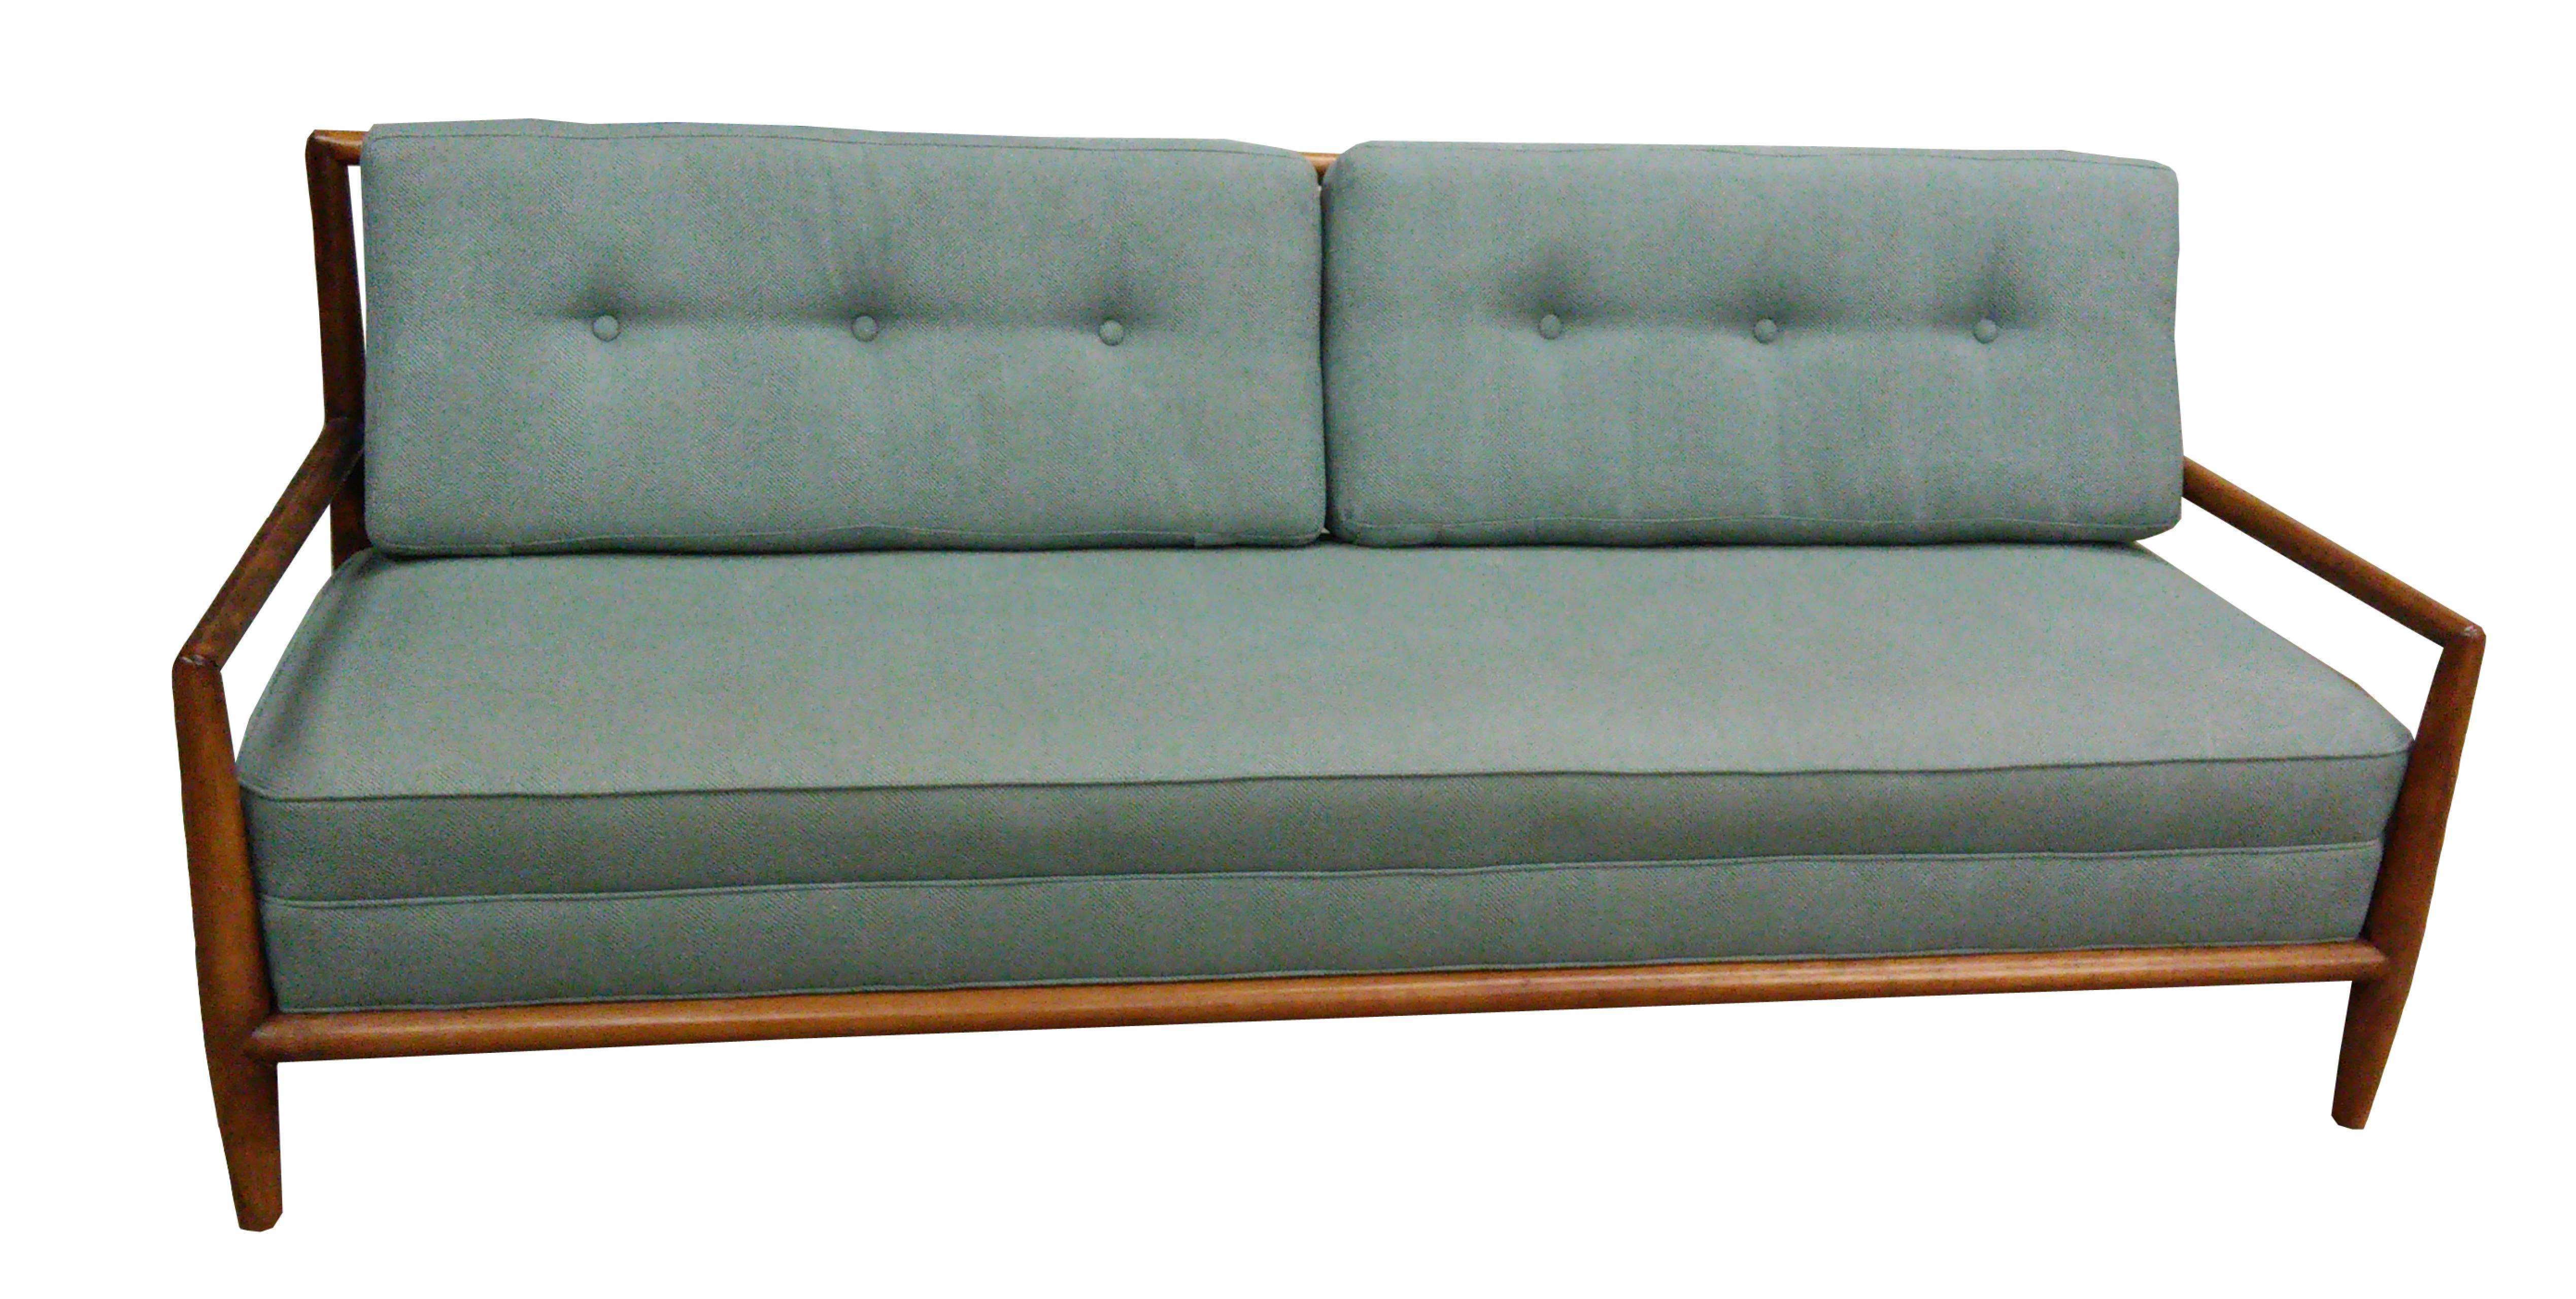 Long couch designed by T.H. Robsjohn-Gibbings for Widdicomb, circa 1950. New upholstery and cushions. Solid Clara walnut wraparound frame with solid walnut slats in back. Has been professionally restored and is in excellent condition. Pair of